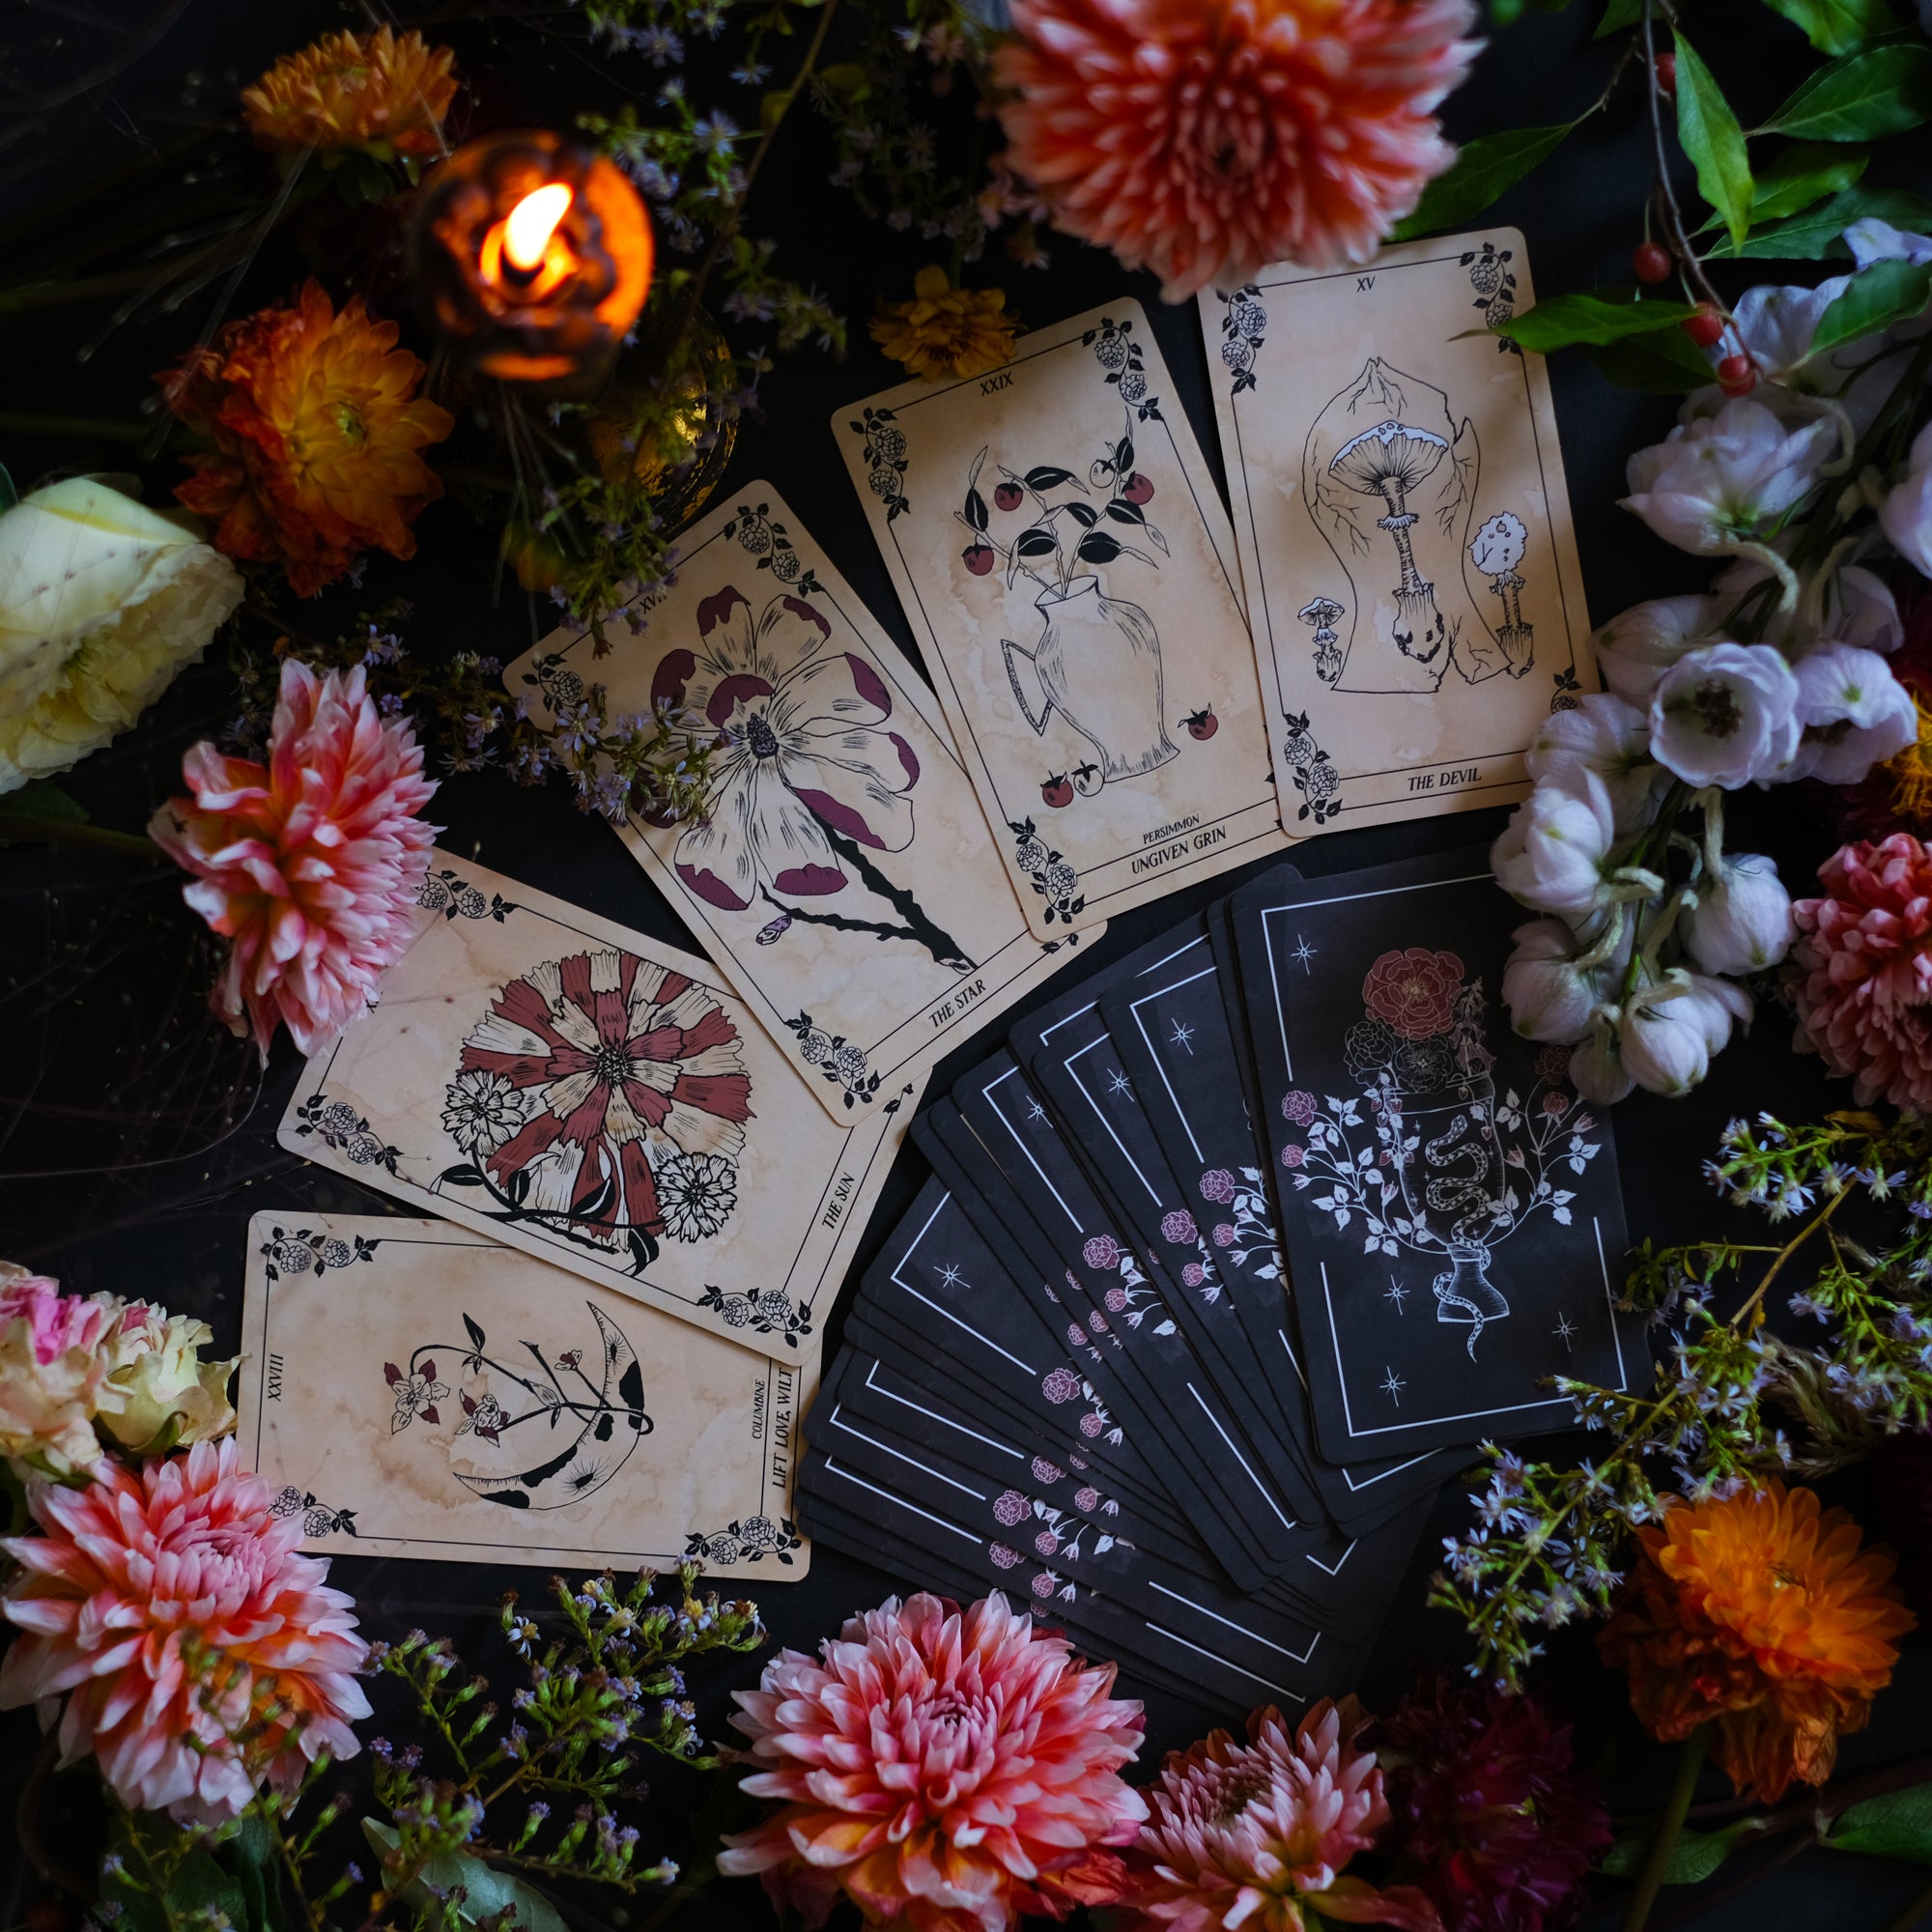 The Botanical Oracle deck, Maiden, illustrated by hand, rooted in botanicals, with guidebook.